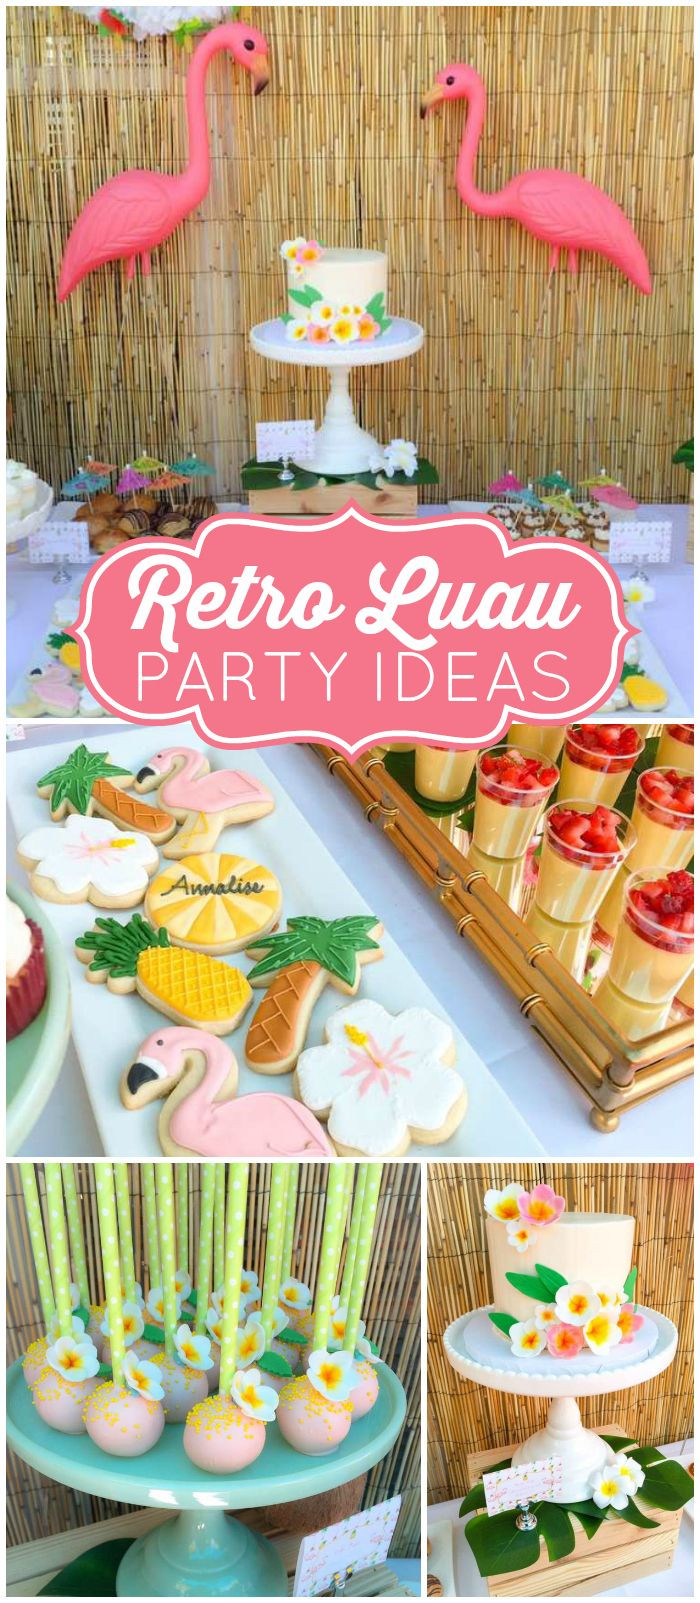 Summer Graduation Party Ideas
 How cool is this retro luau for a graduation party See